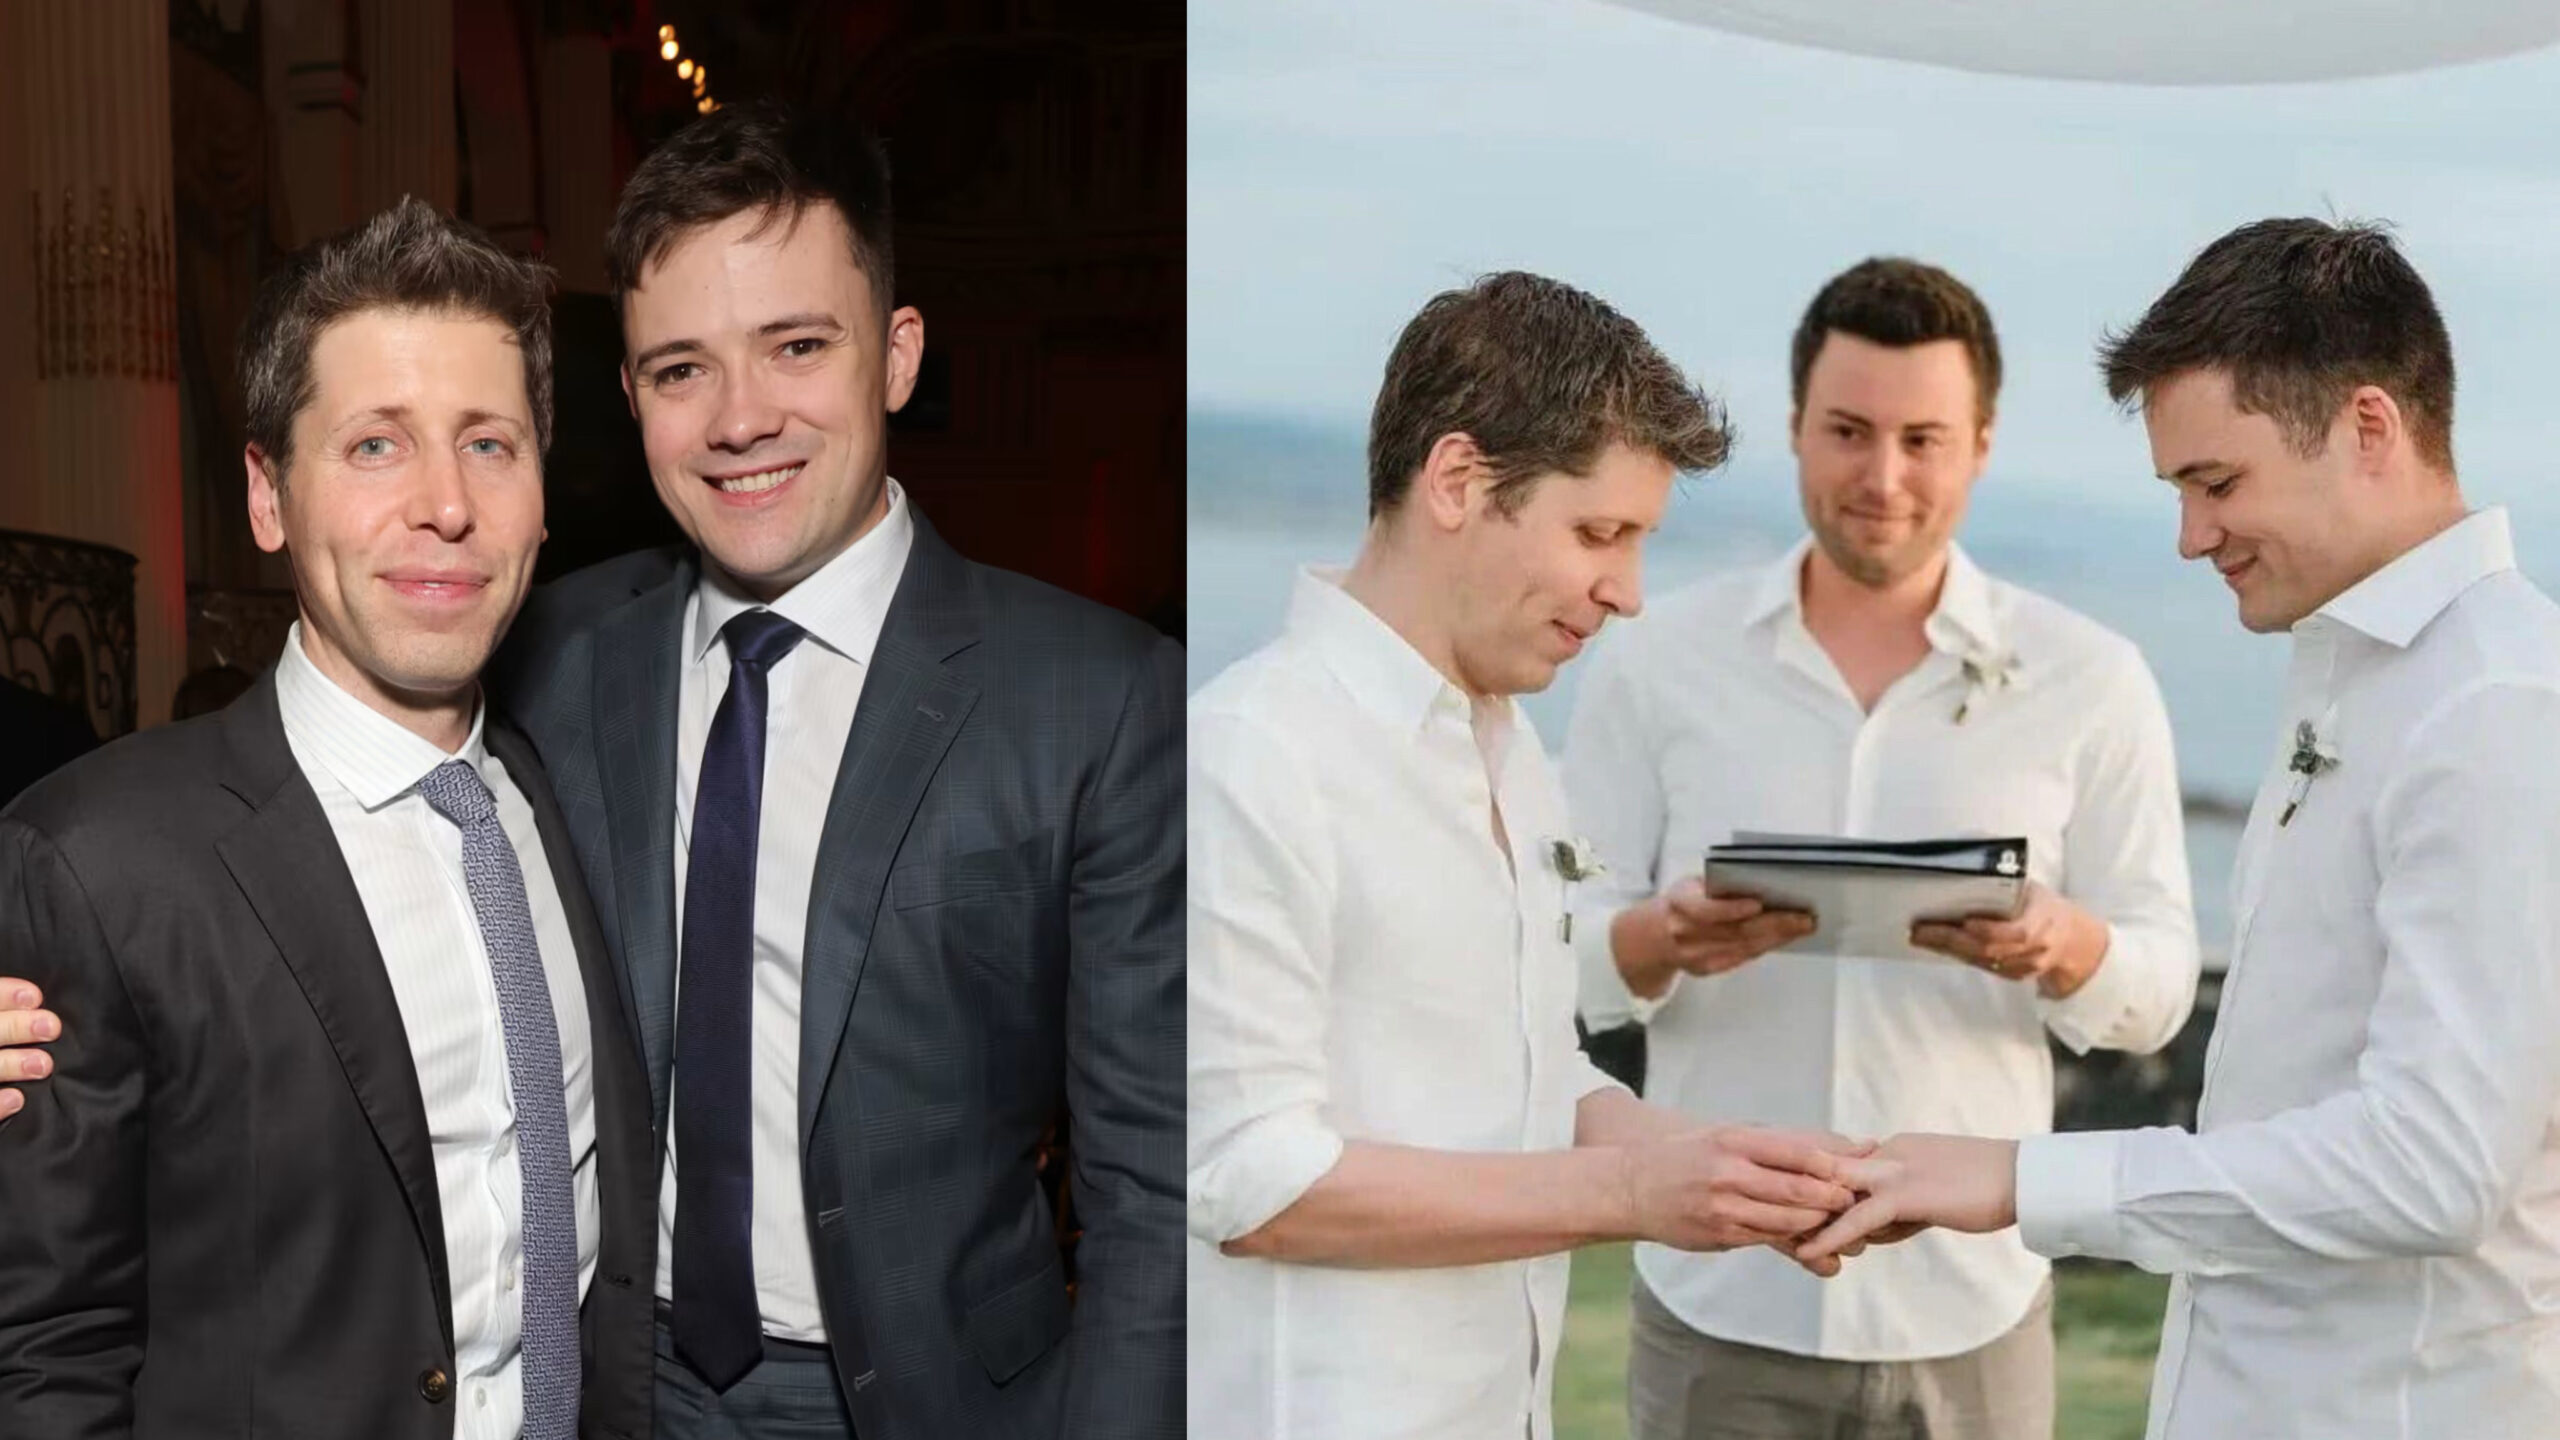 OpenAI CEO Sam Altman marries his male partner, Oliver Mulherin